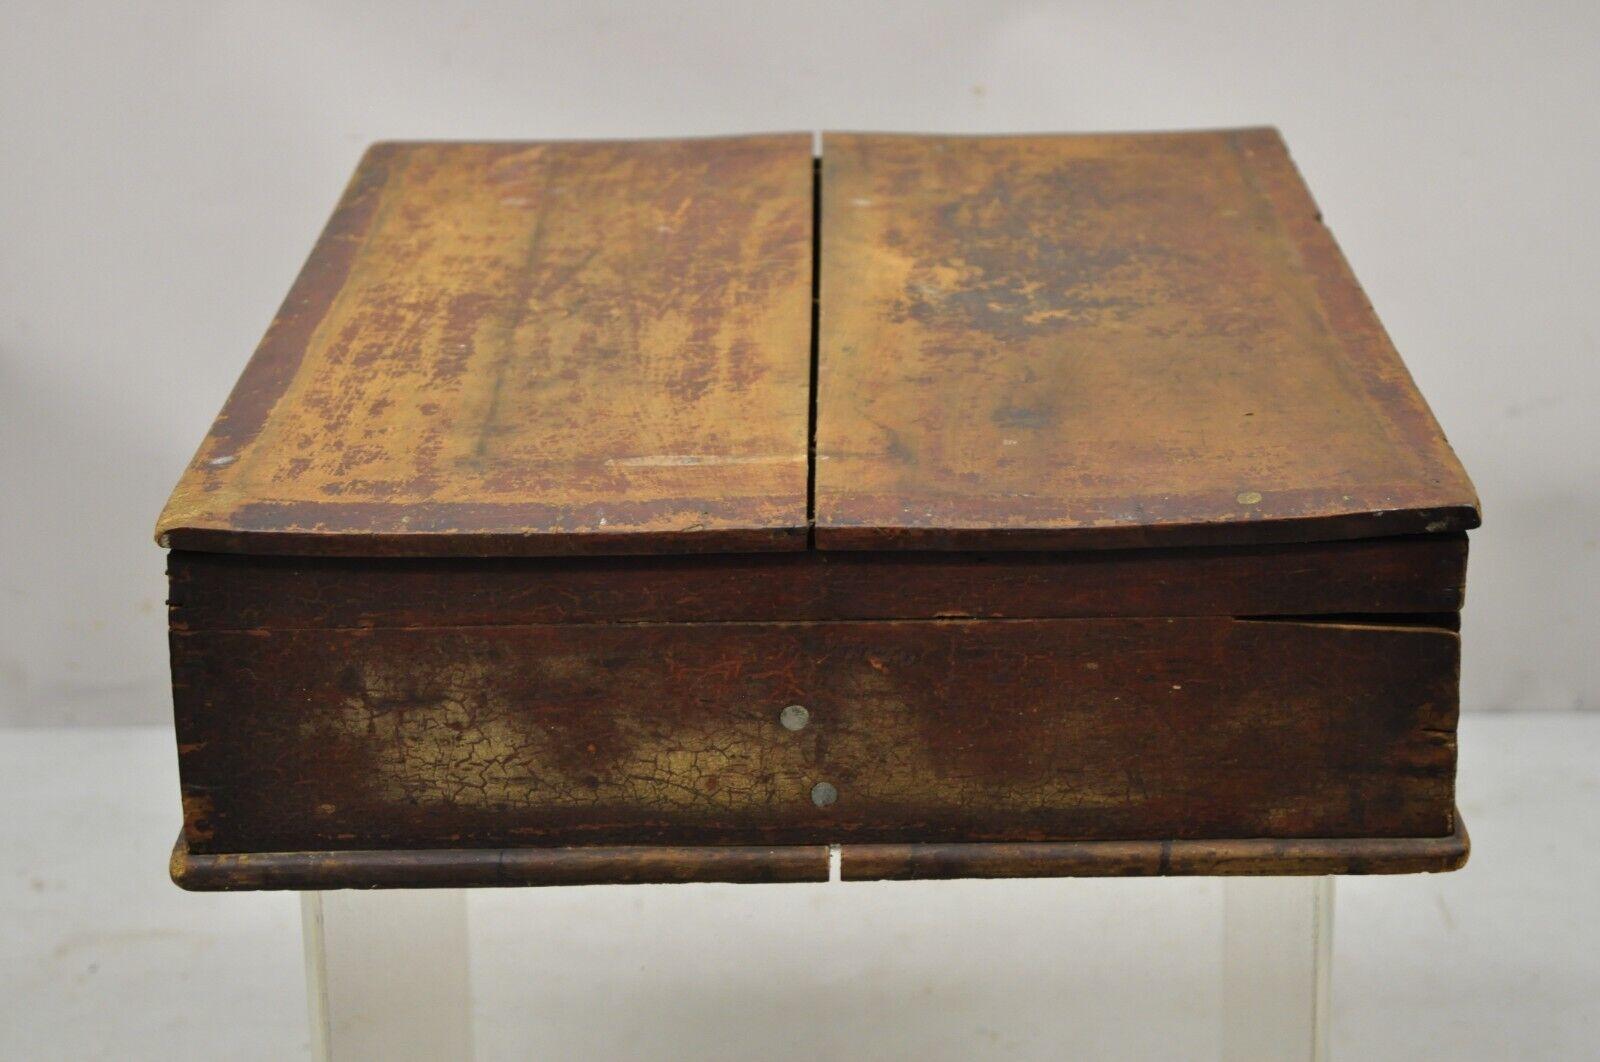 Antique 19th C American Primitive Wooden Distressed Paint Storage Tool Work Box For Sale 4